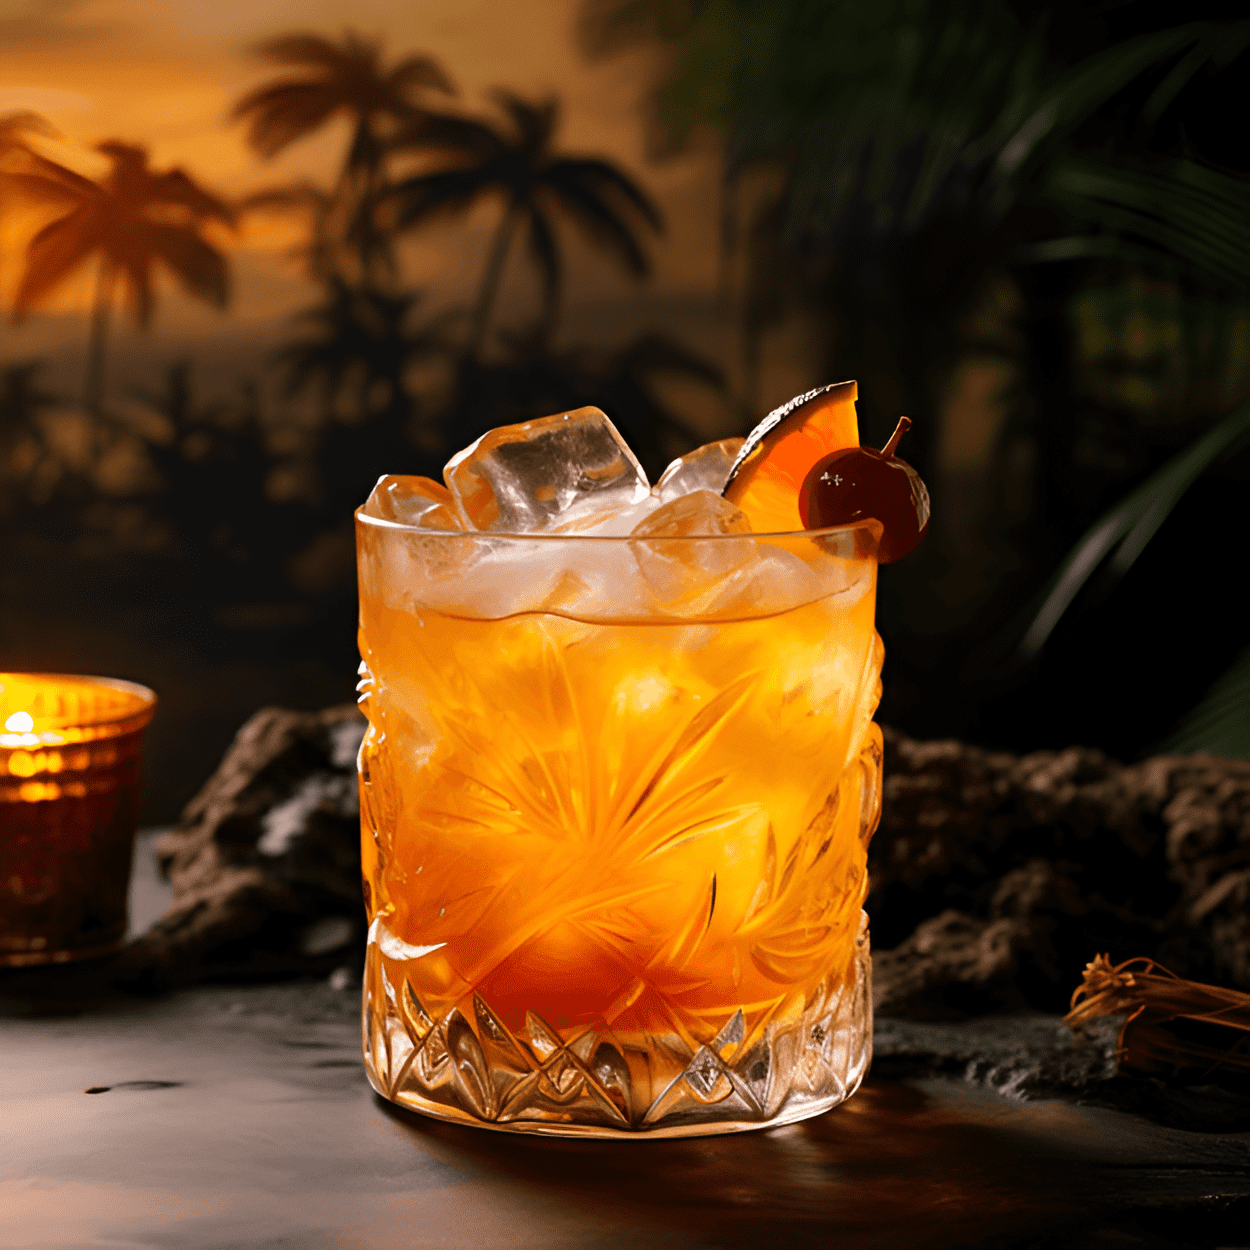 Exotic Cocktail Recipe - The Exotic cocktail is a delightful blend of sweet, sour, and fruity flavors. It has a refreshing and tropical taste, with a hint of tanginess from the citrus fruits. The cocktail is well-balanced, with a smooth and velvety texture that leaves a pleasant aftertaste.